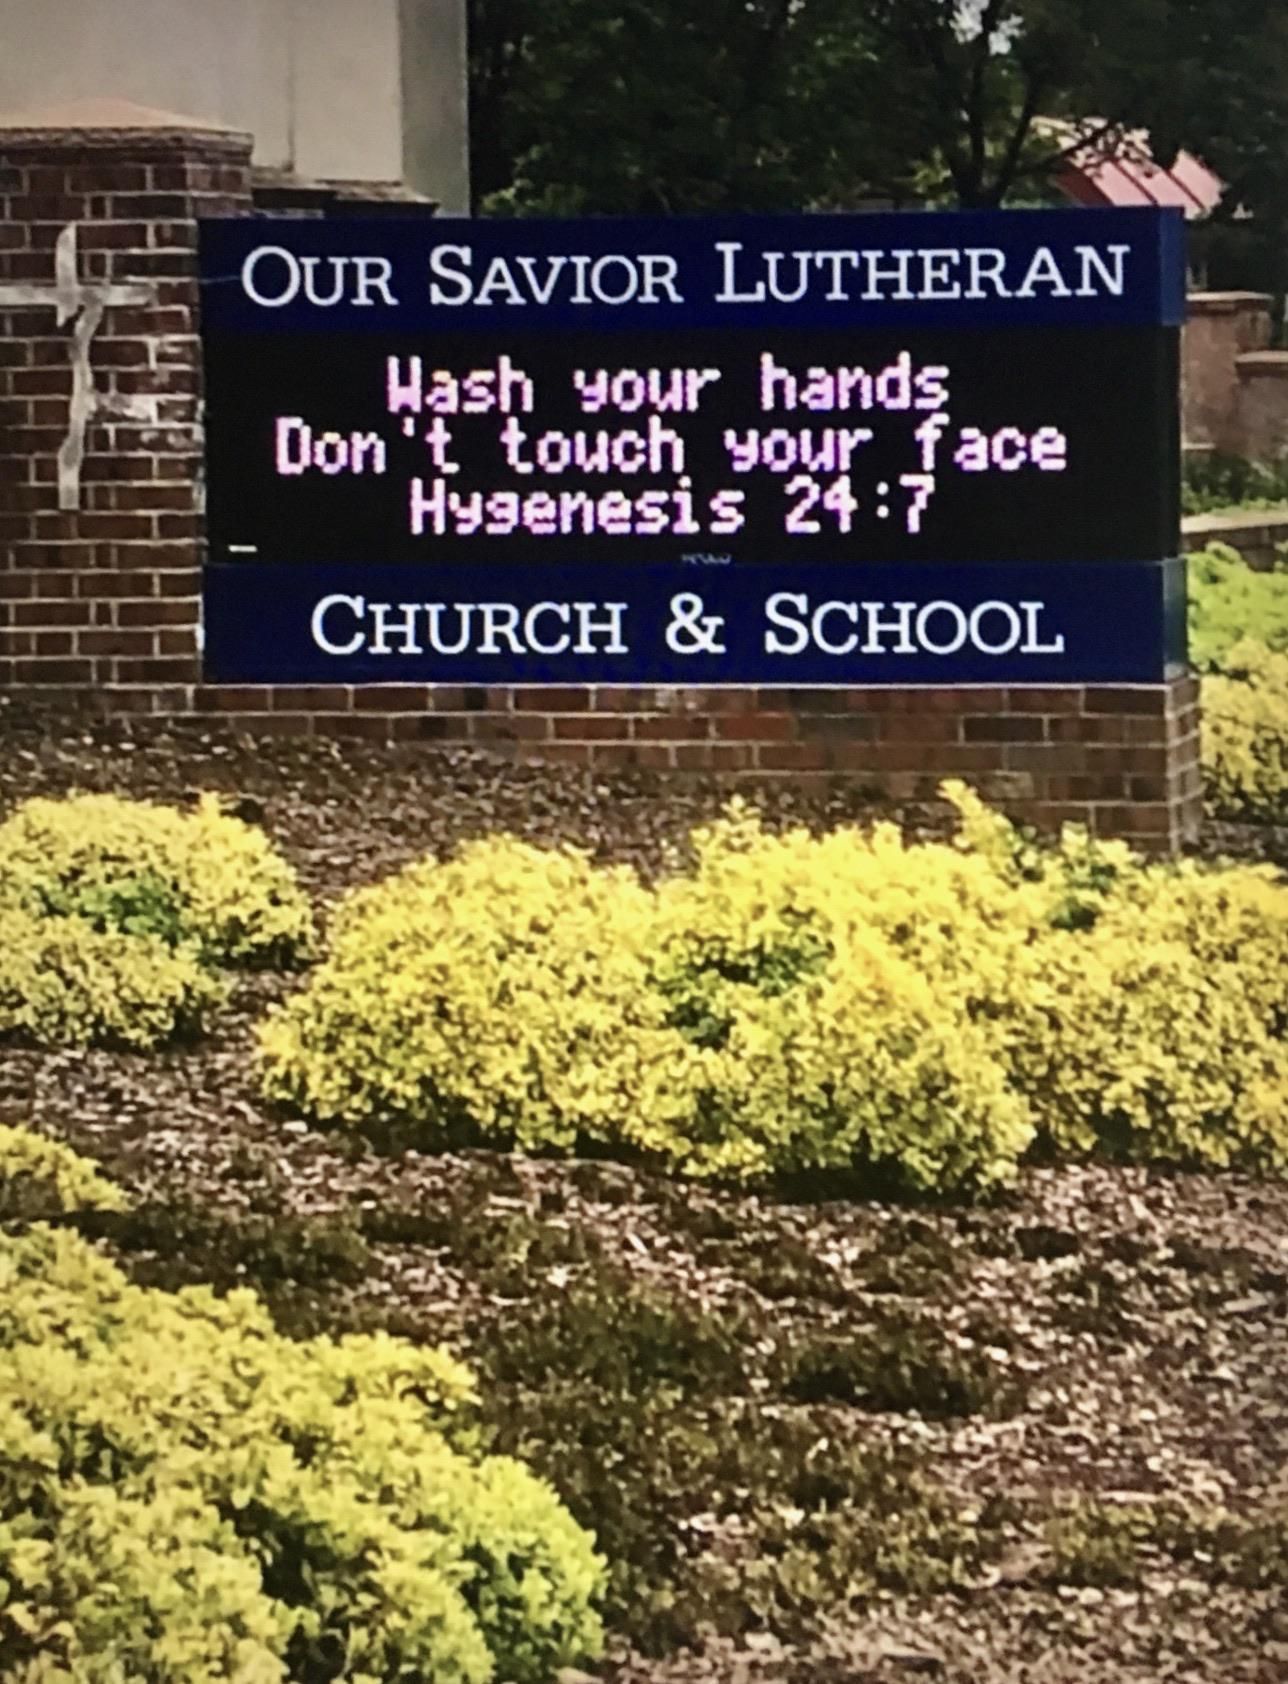 This Lutheran school sign